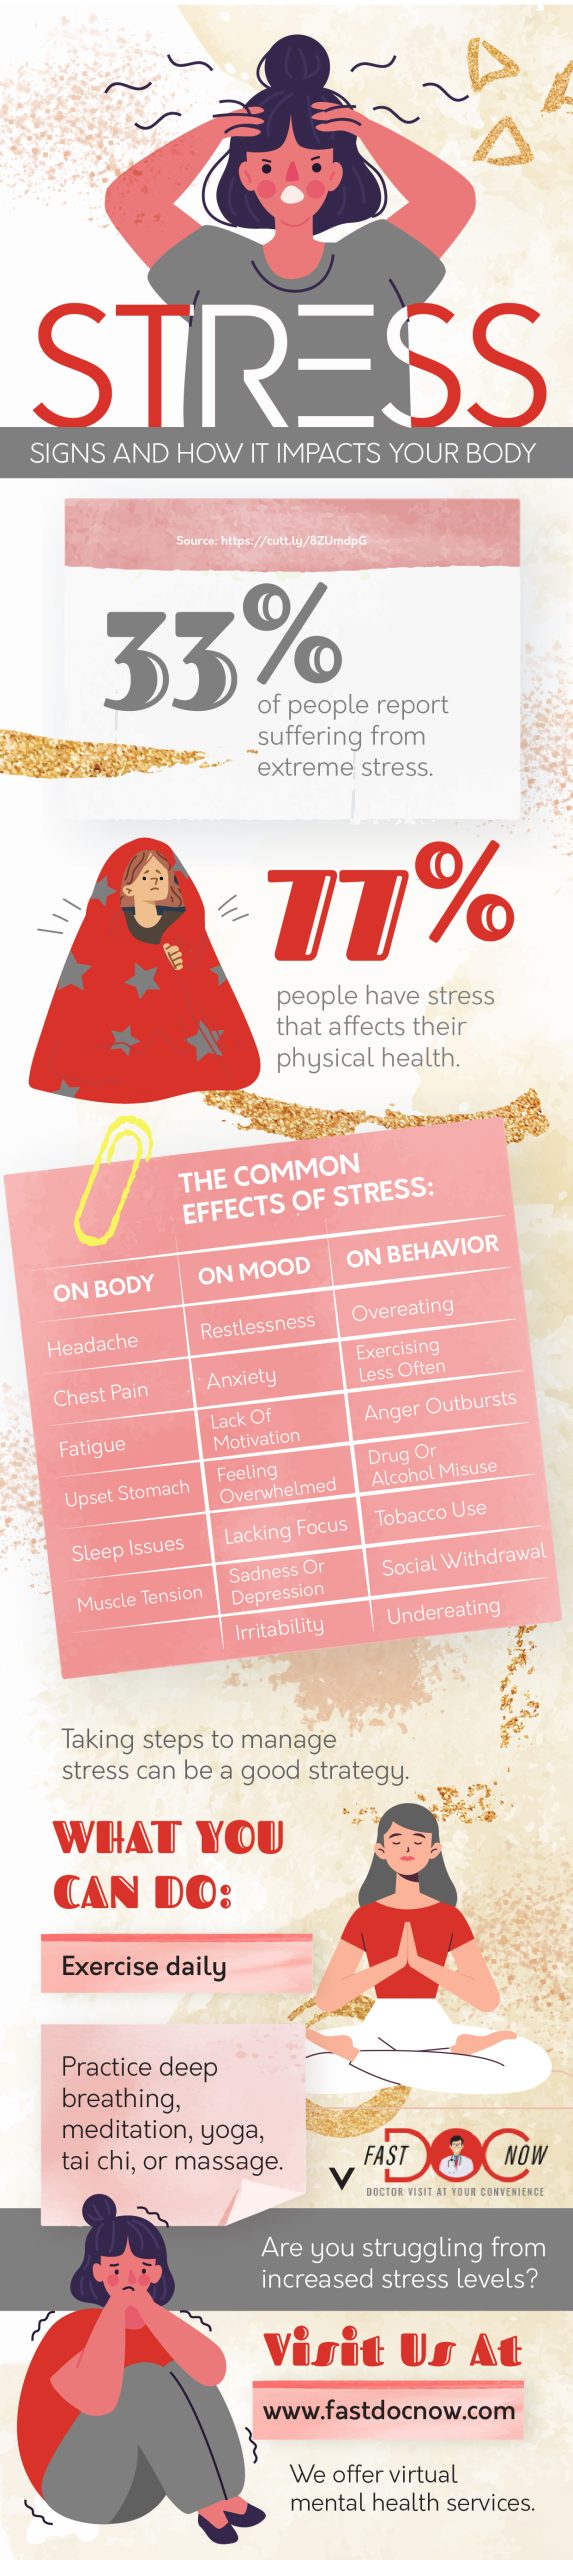 Stress Signs And How It Impacts Your Body